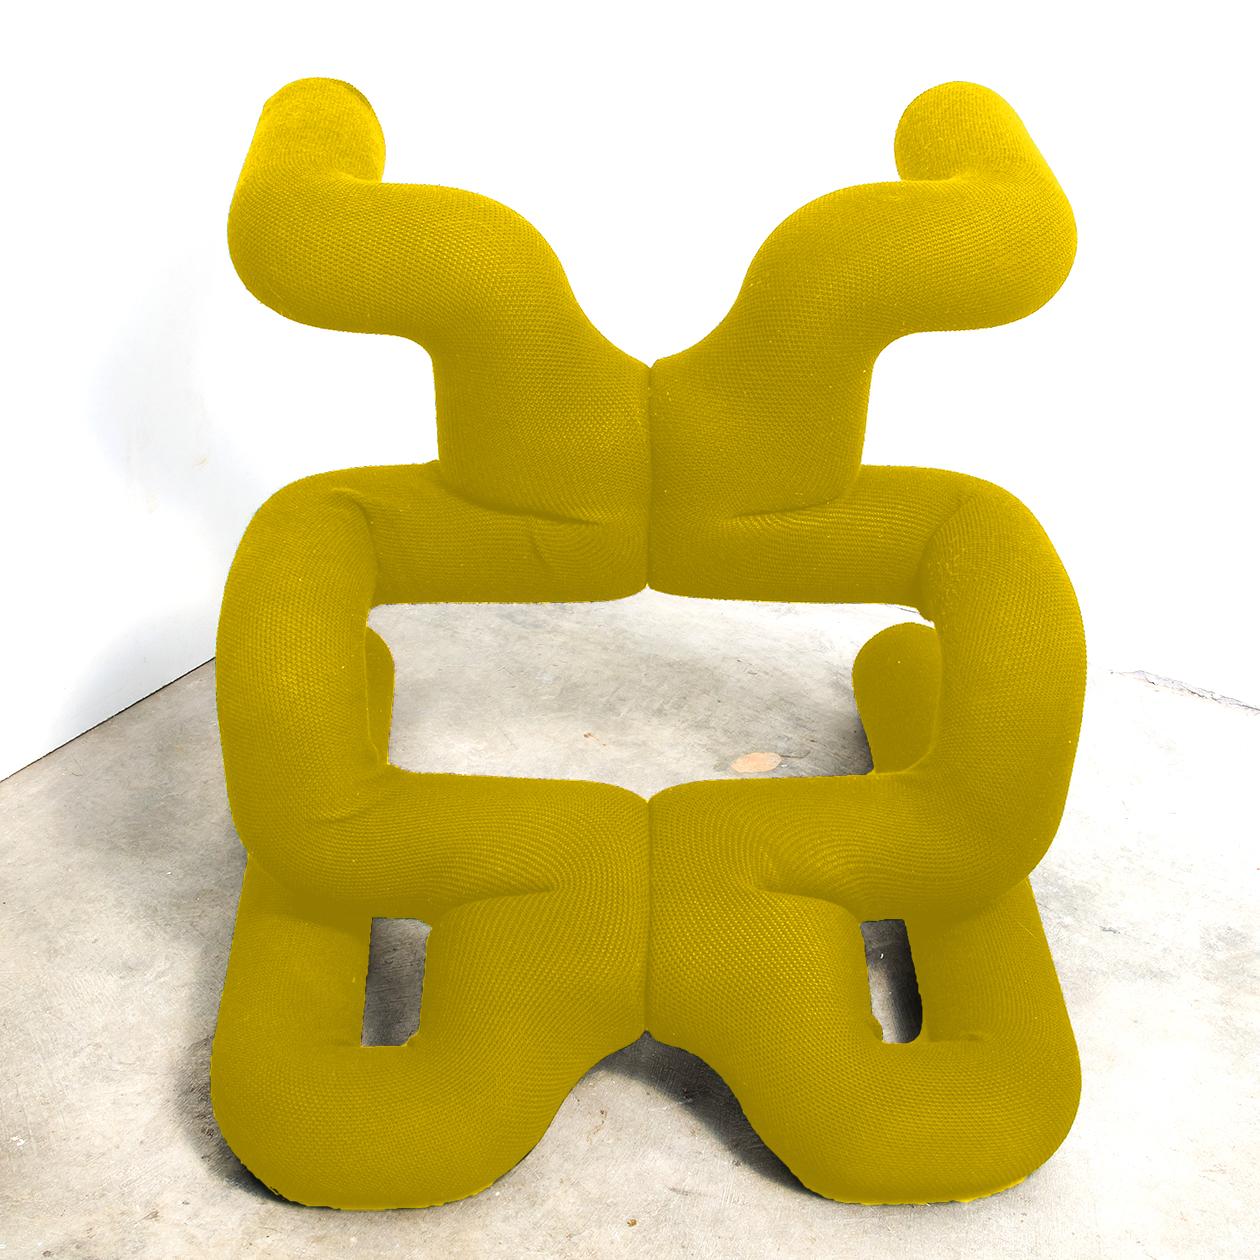 20th Century Pair of Iconic Yello Lounge Chairs by Terje Ekstrom, Norway, 1980s